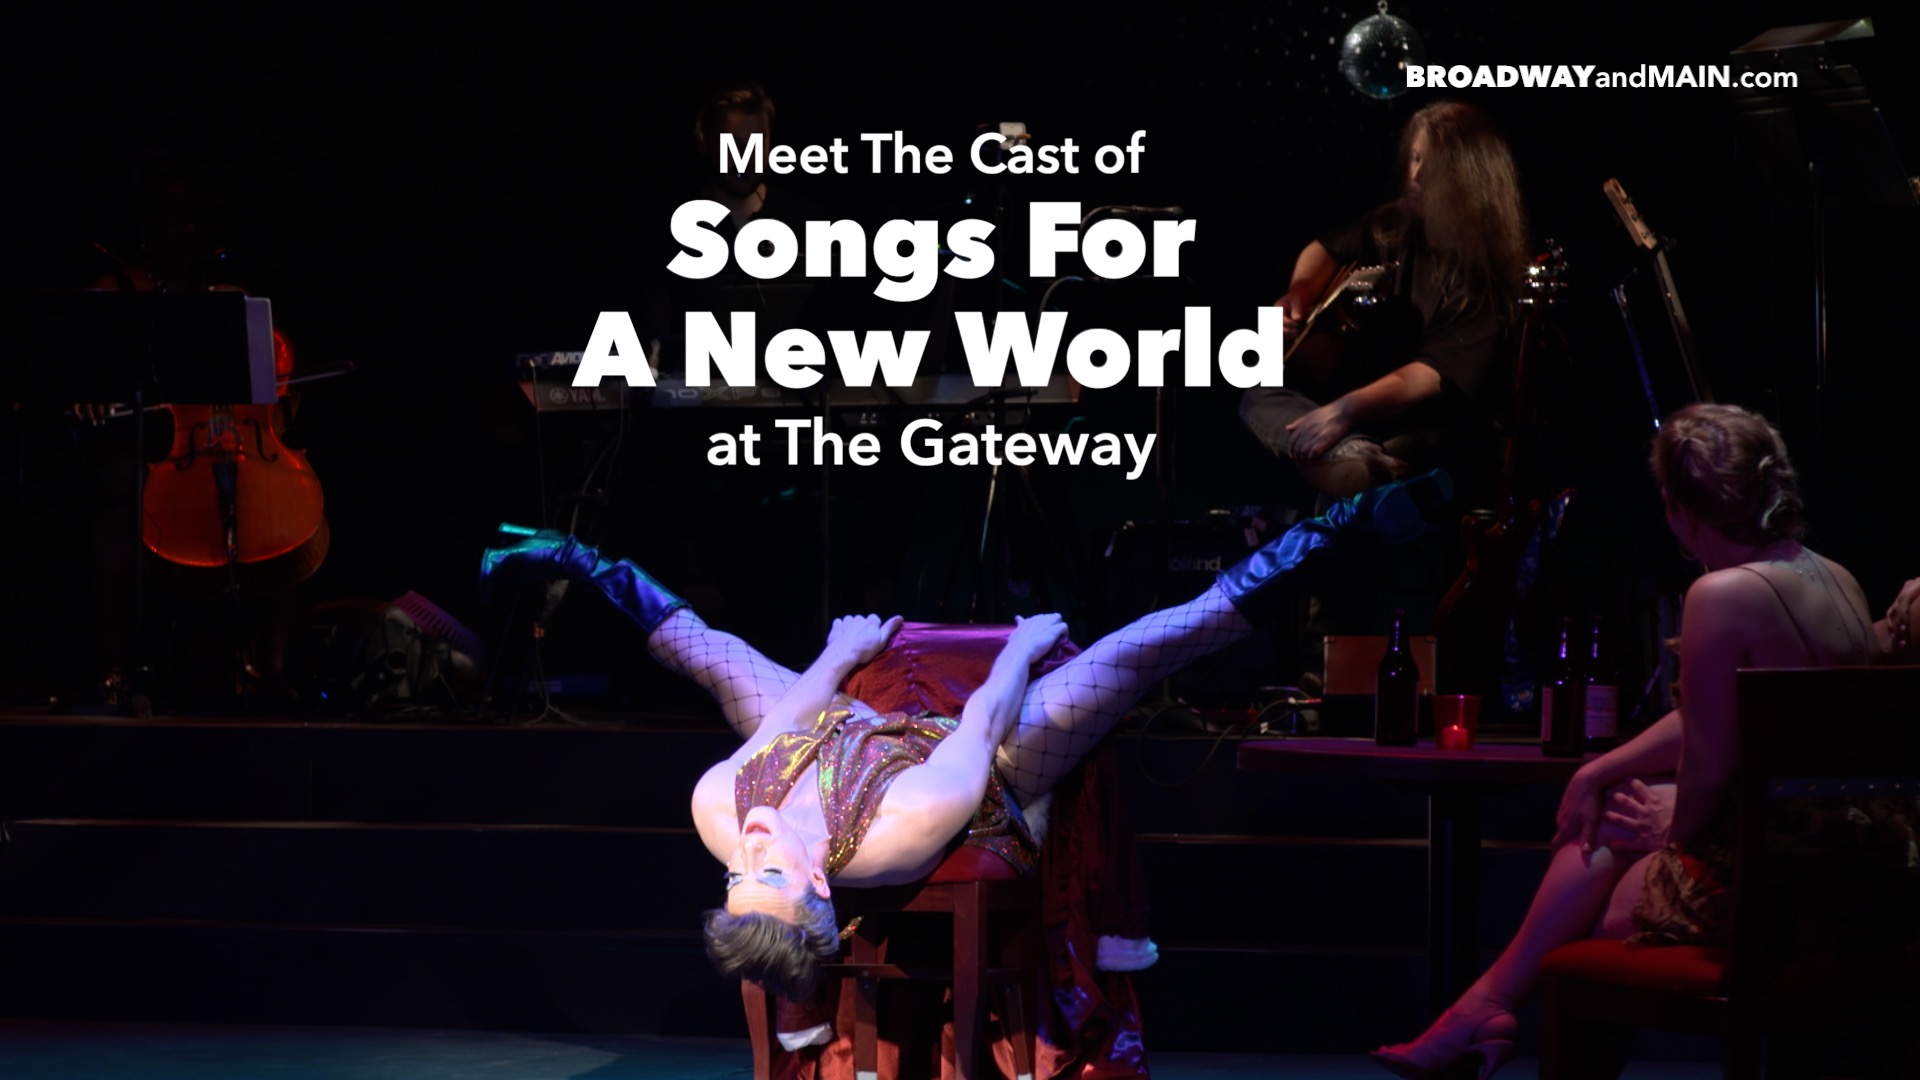 Meet The Cast of Songs For A New World at The Gateway